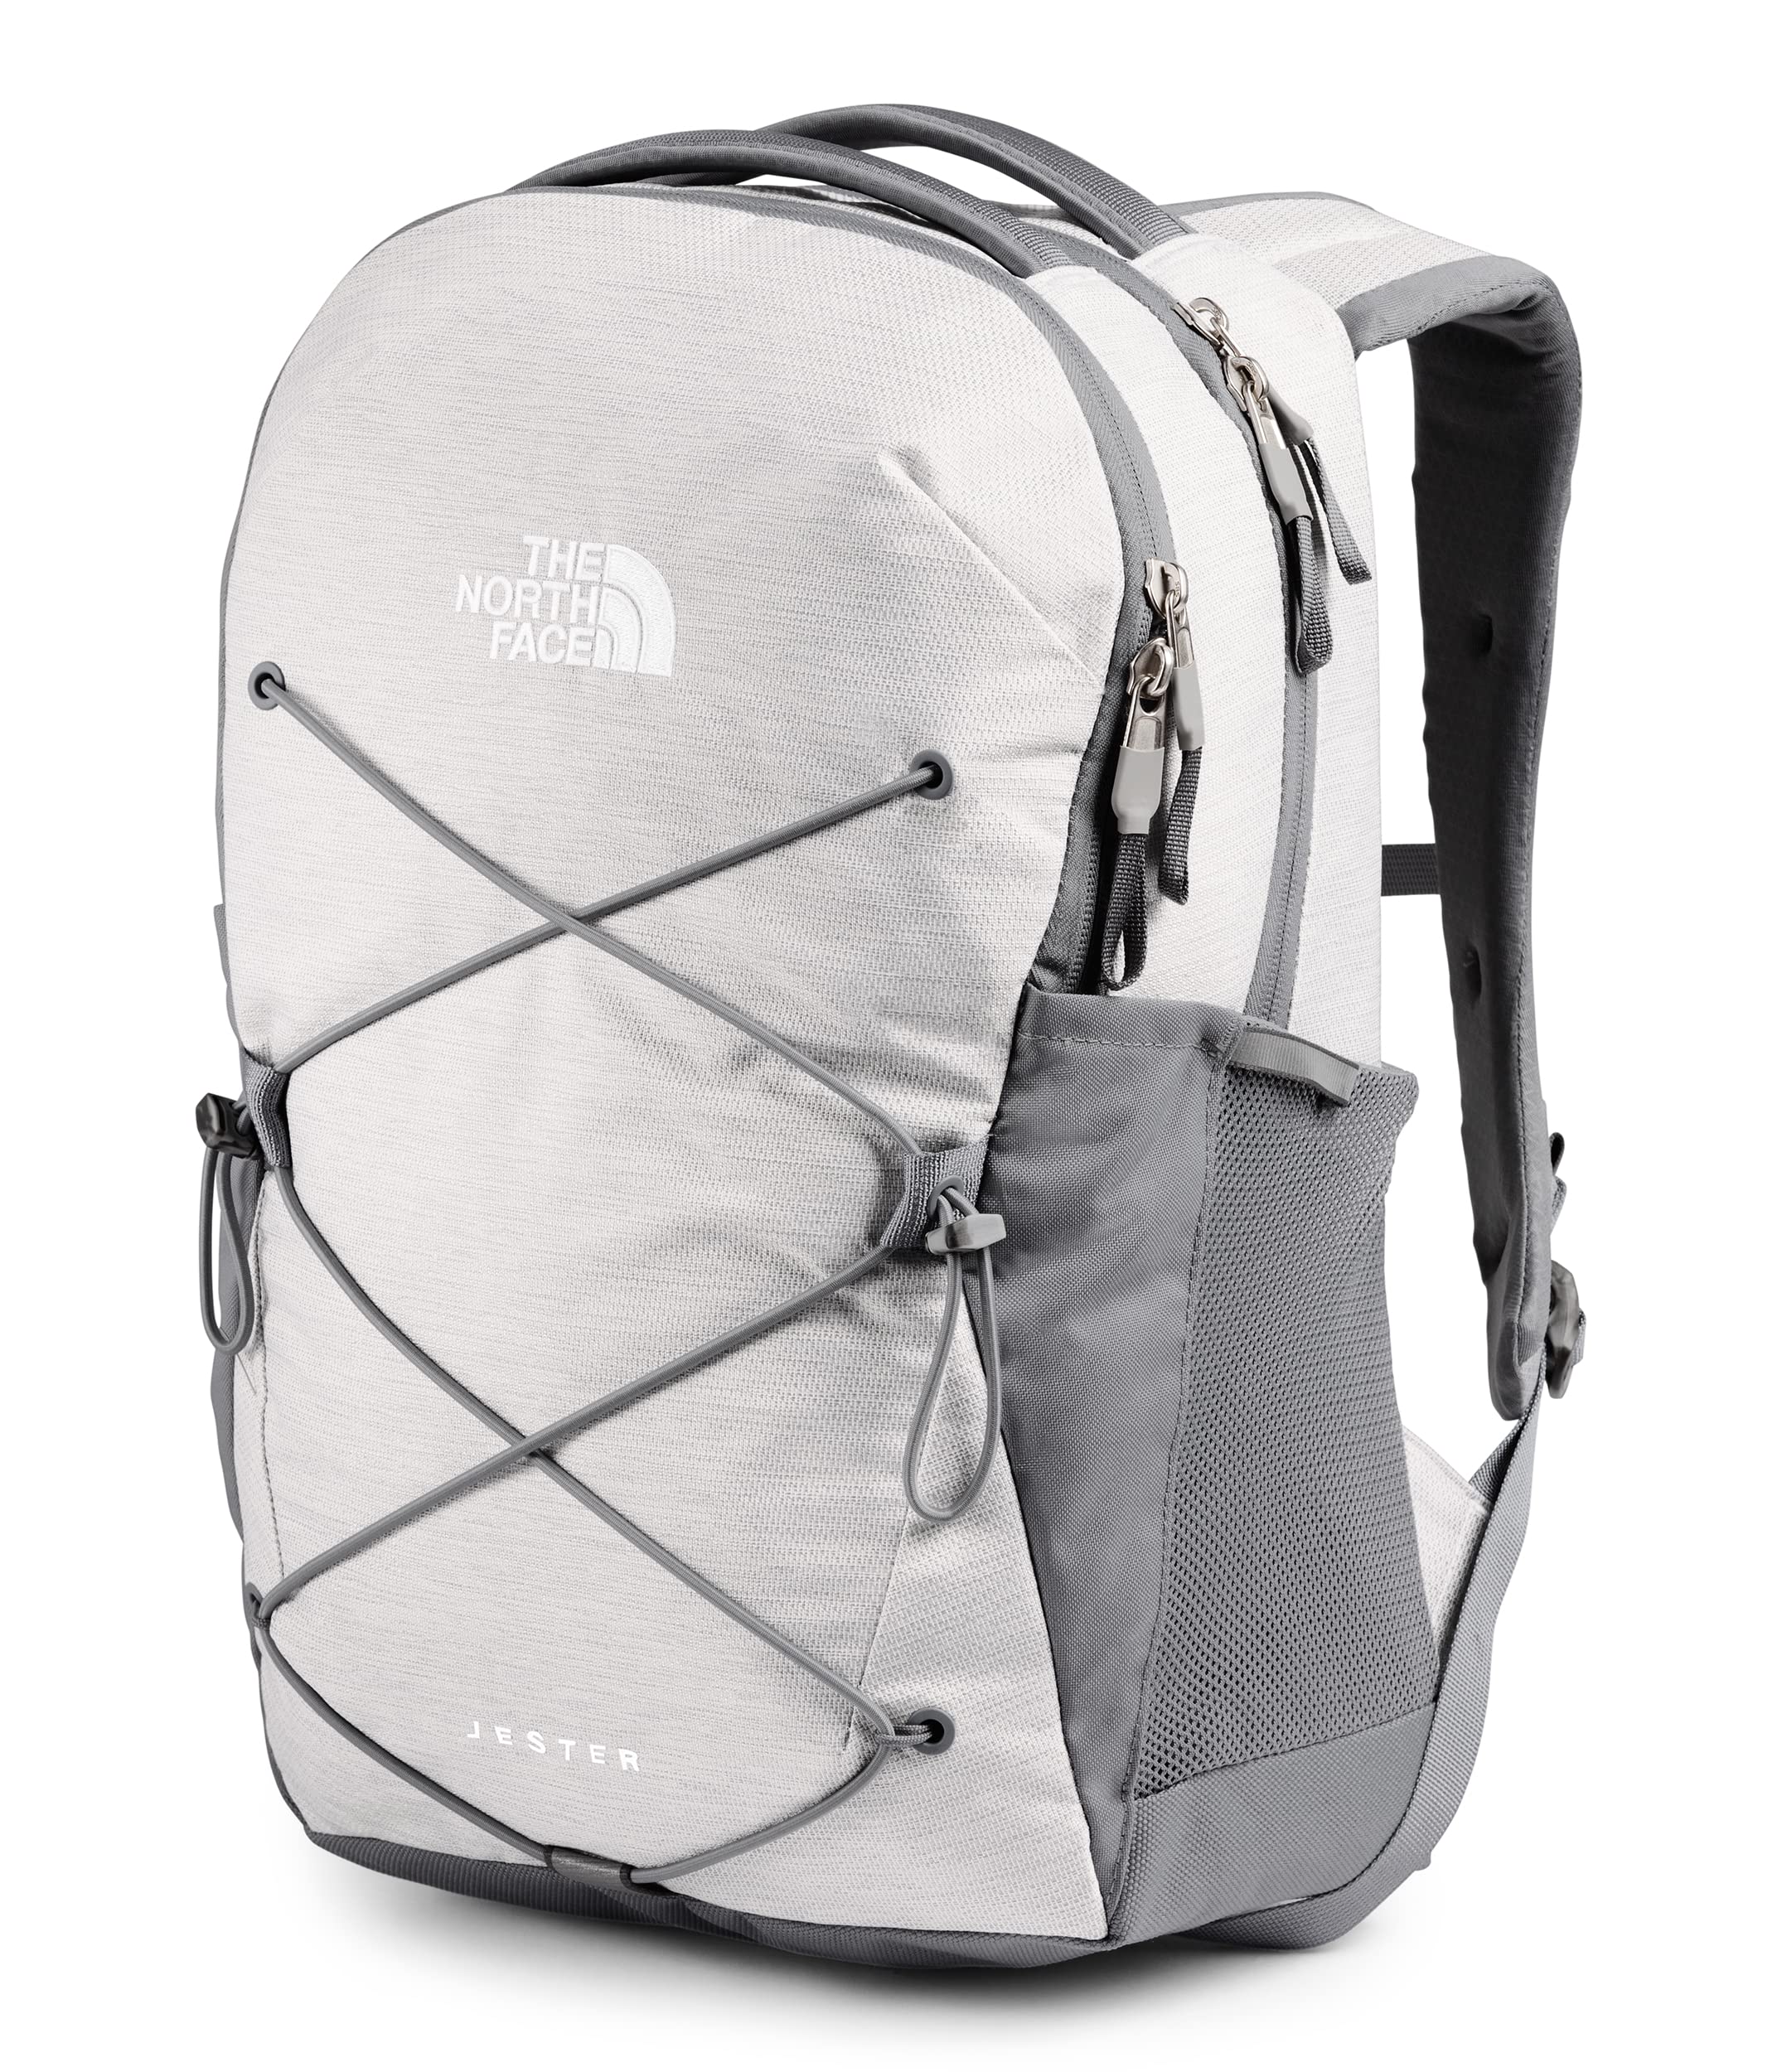 THE NORTH FACE Women's Jester Commuter Laptop Backpack, TNF White Metallic Mélange/Mid Grey, One Size